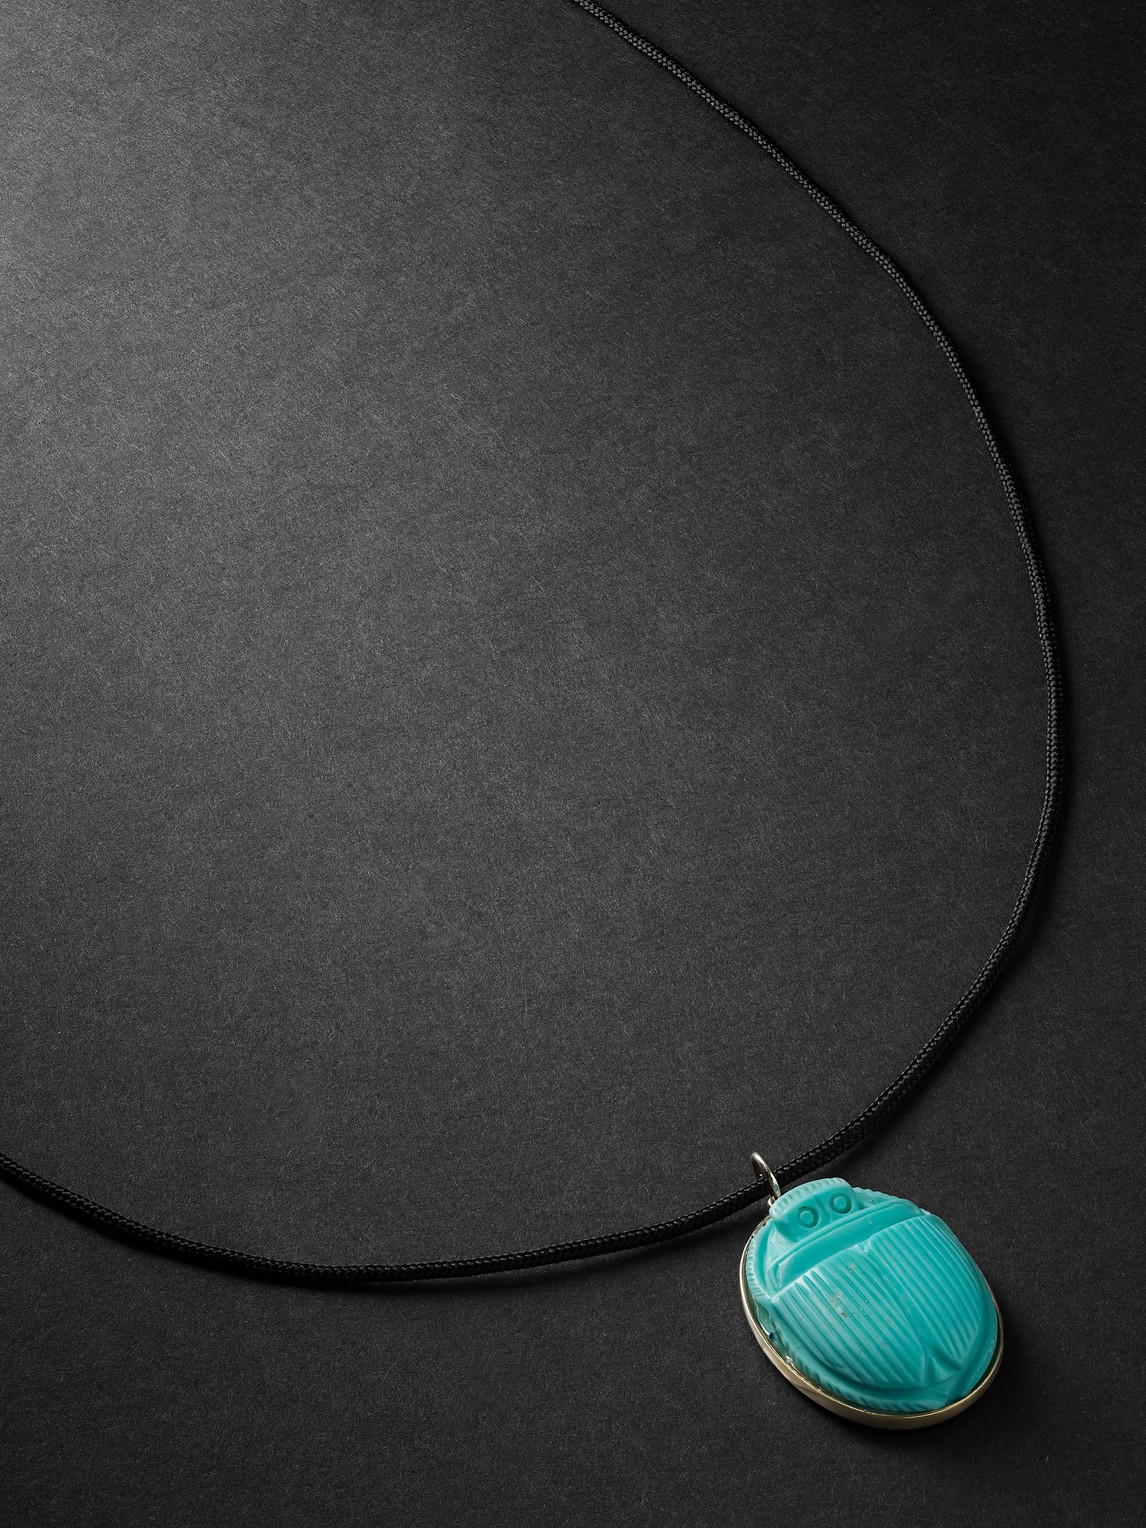 Jacquie Aiche Gold, Turquoise And Cord Necklace In Blue